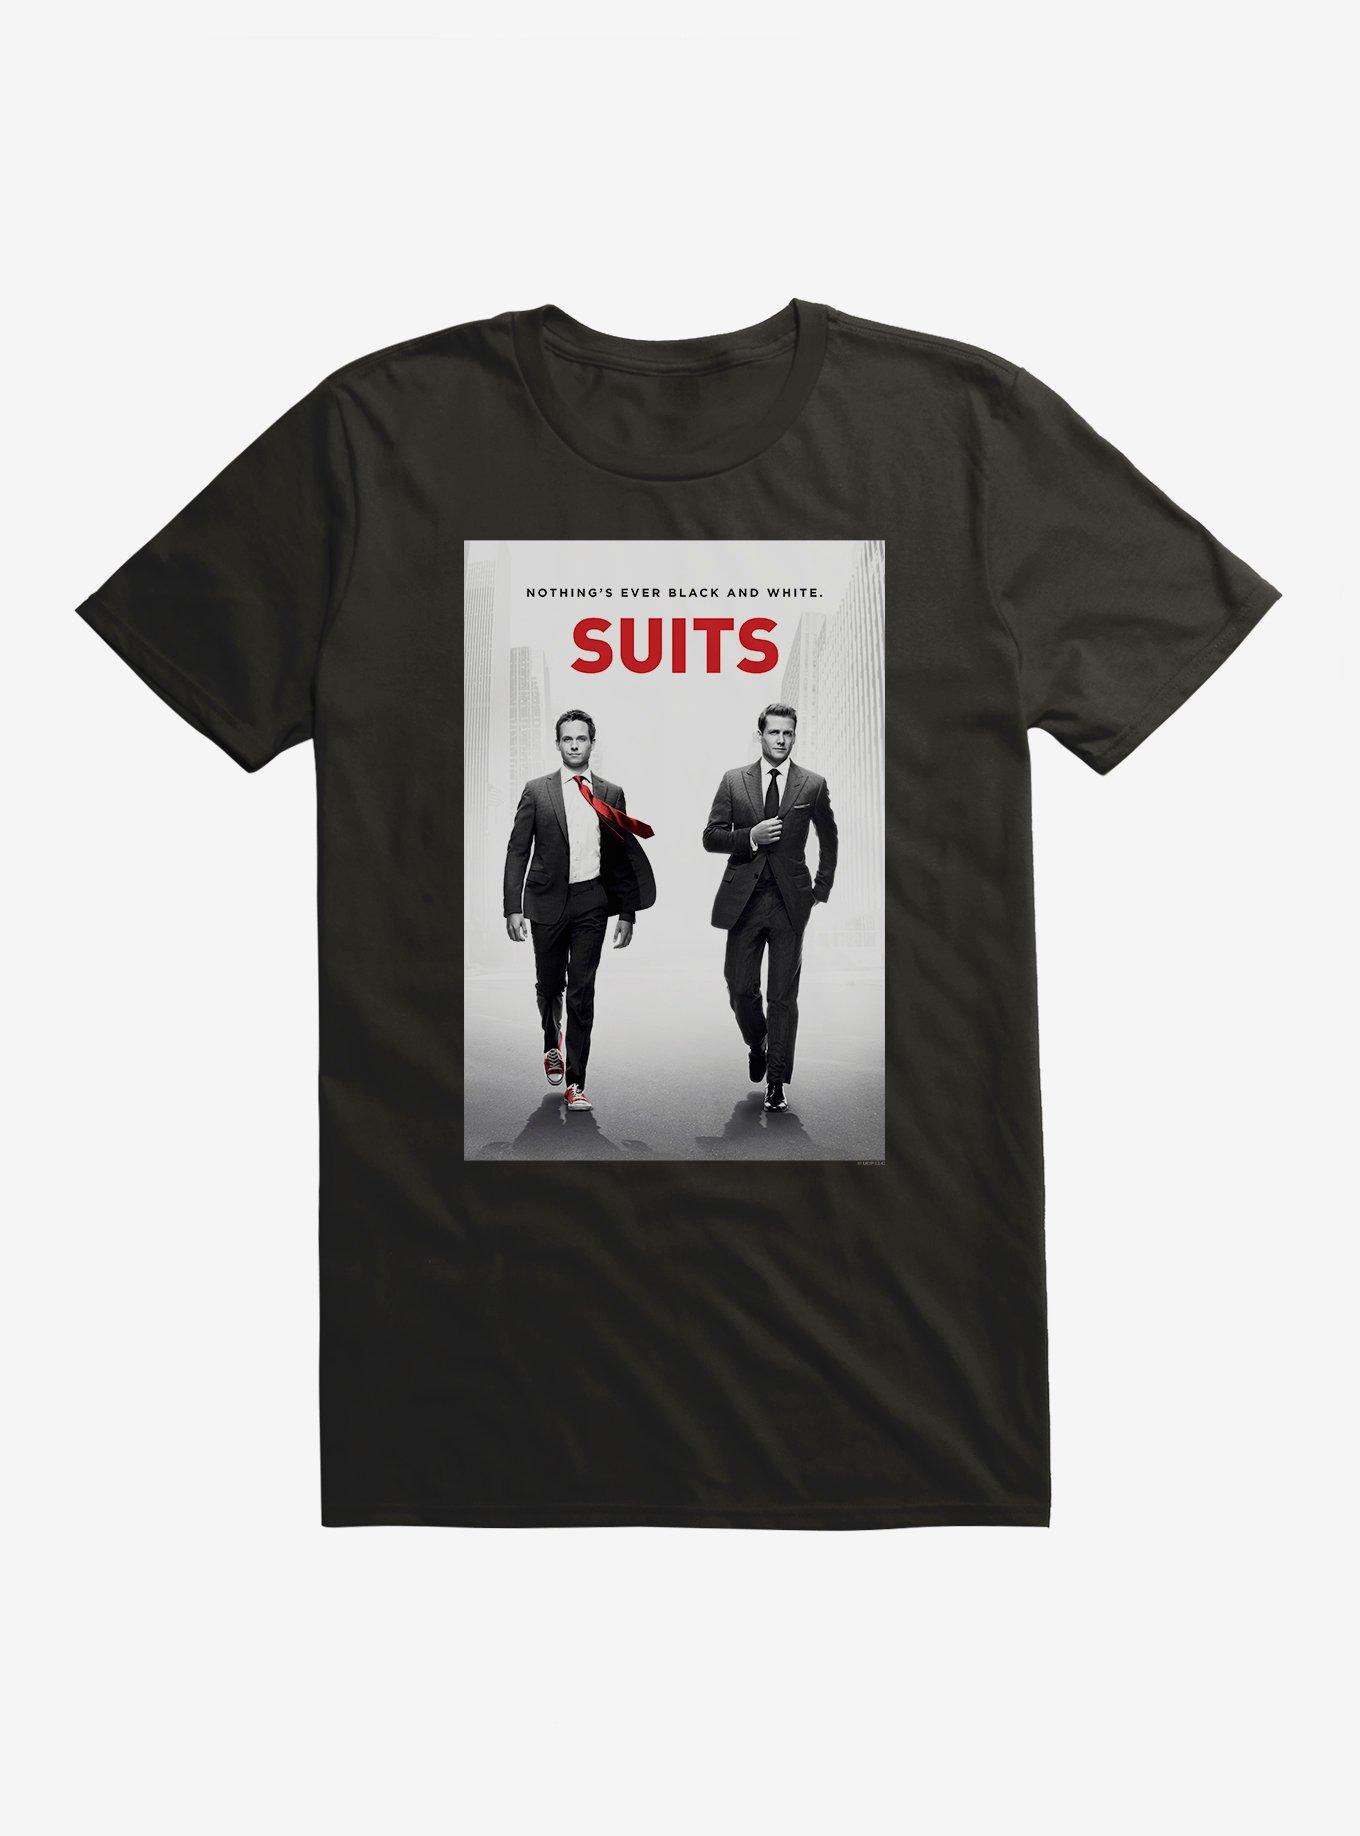 Suits Nothing's Ever Black And White. T-Shirt